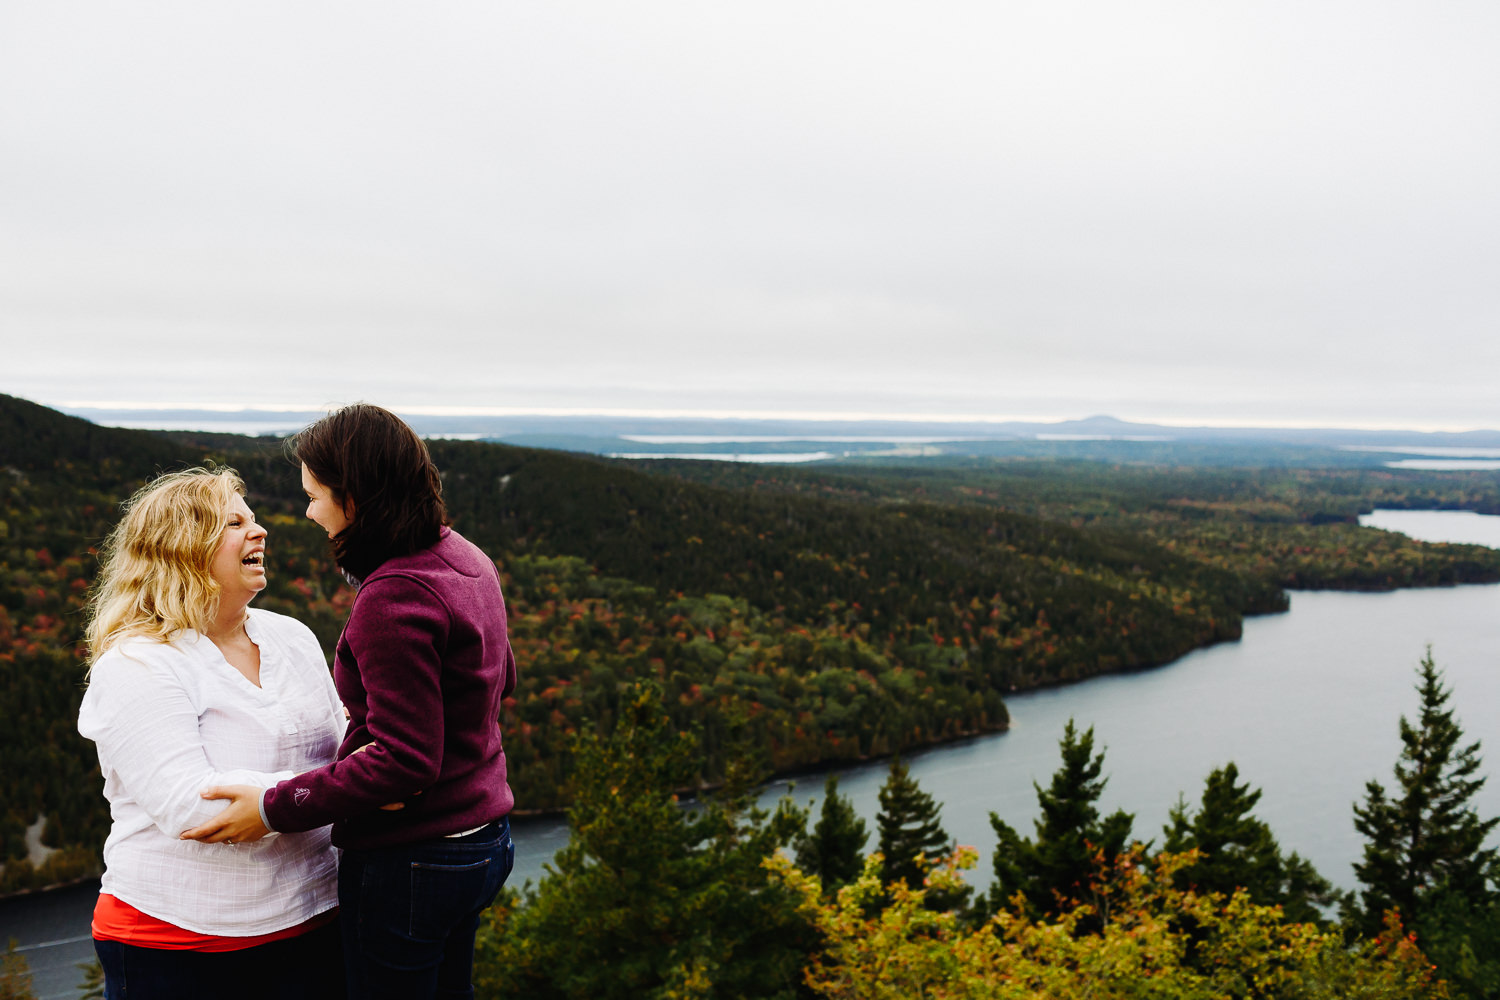 Two women who just got engaged on Beech Mountain in Acadia National Park